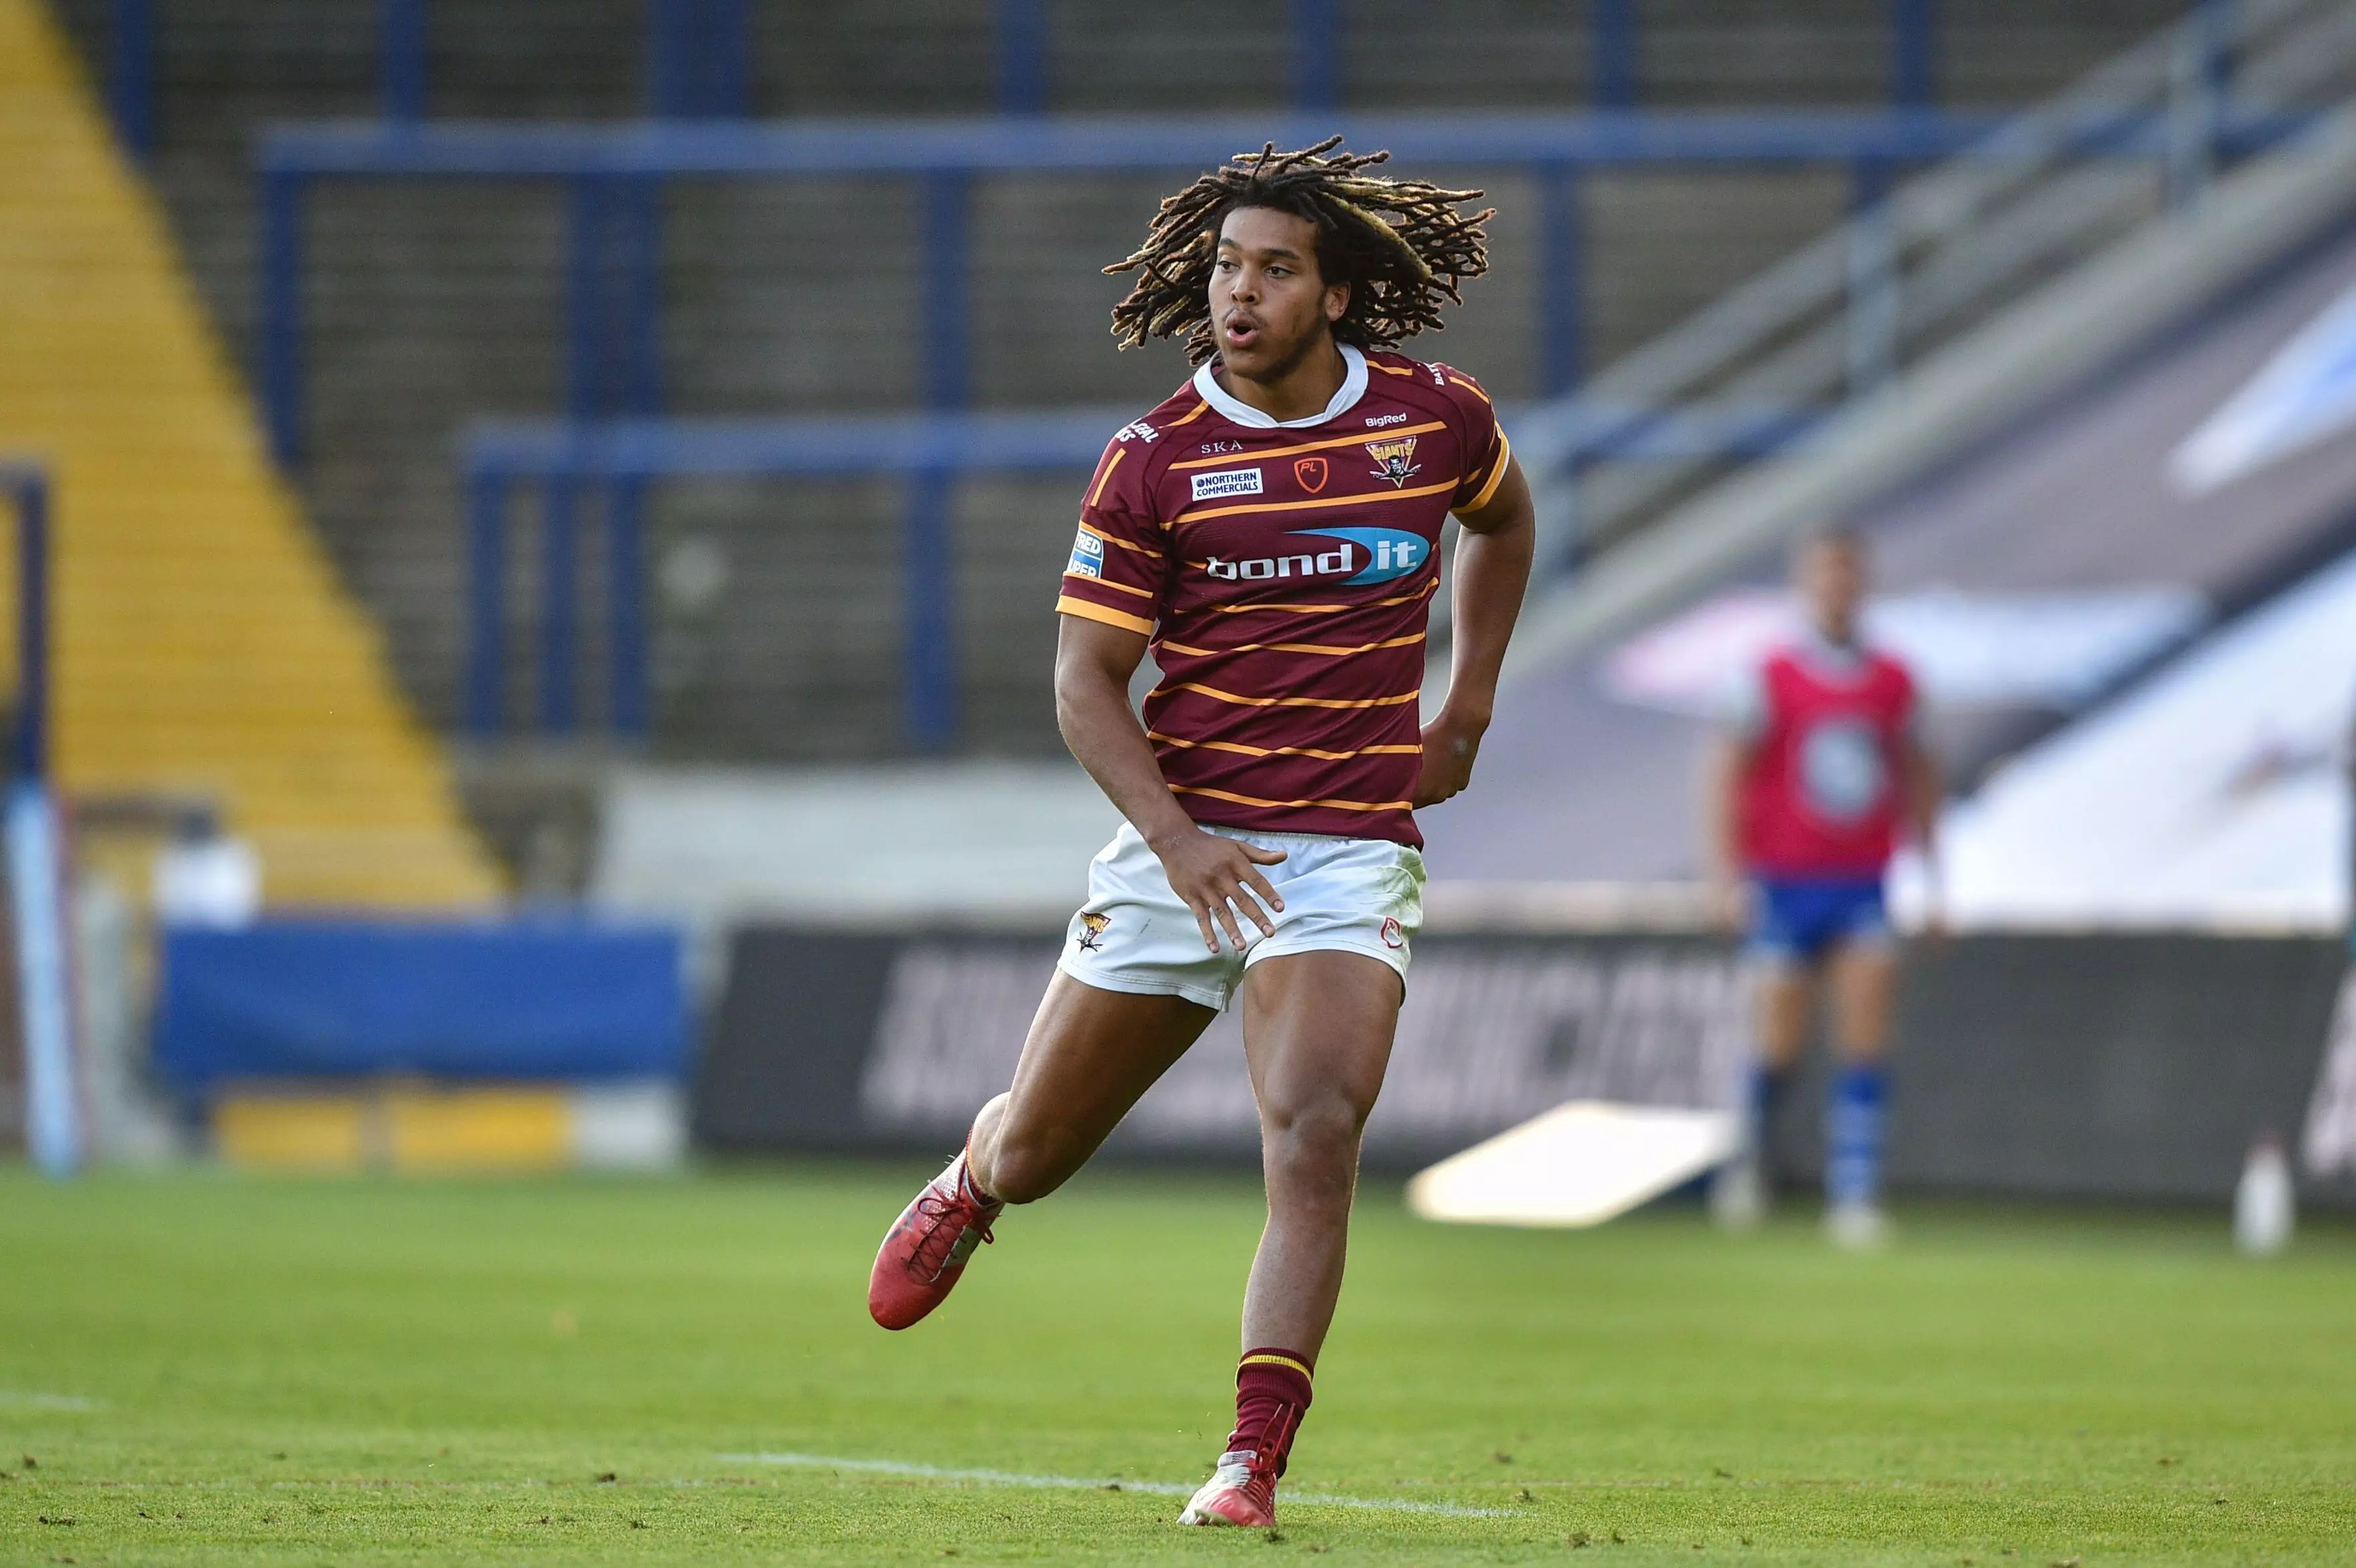 Dominic Young during his time with the Huddersfield Giants.